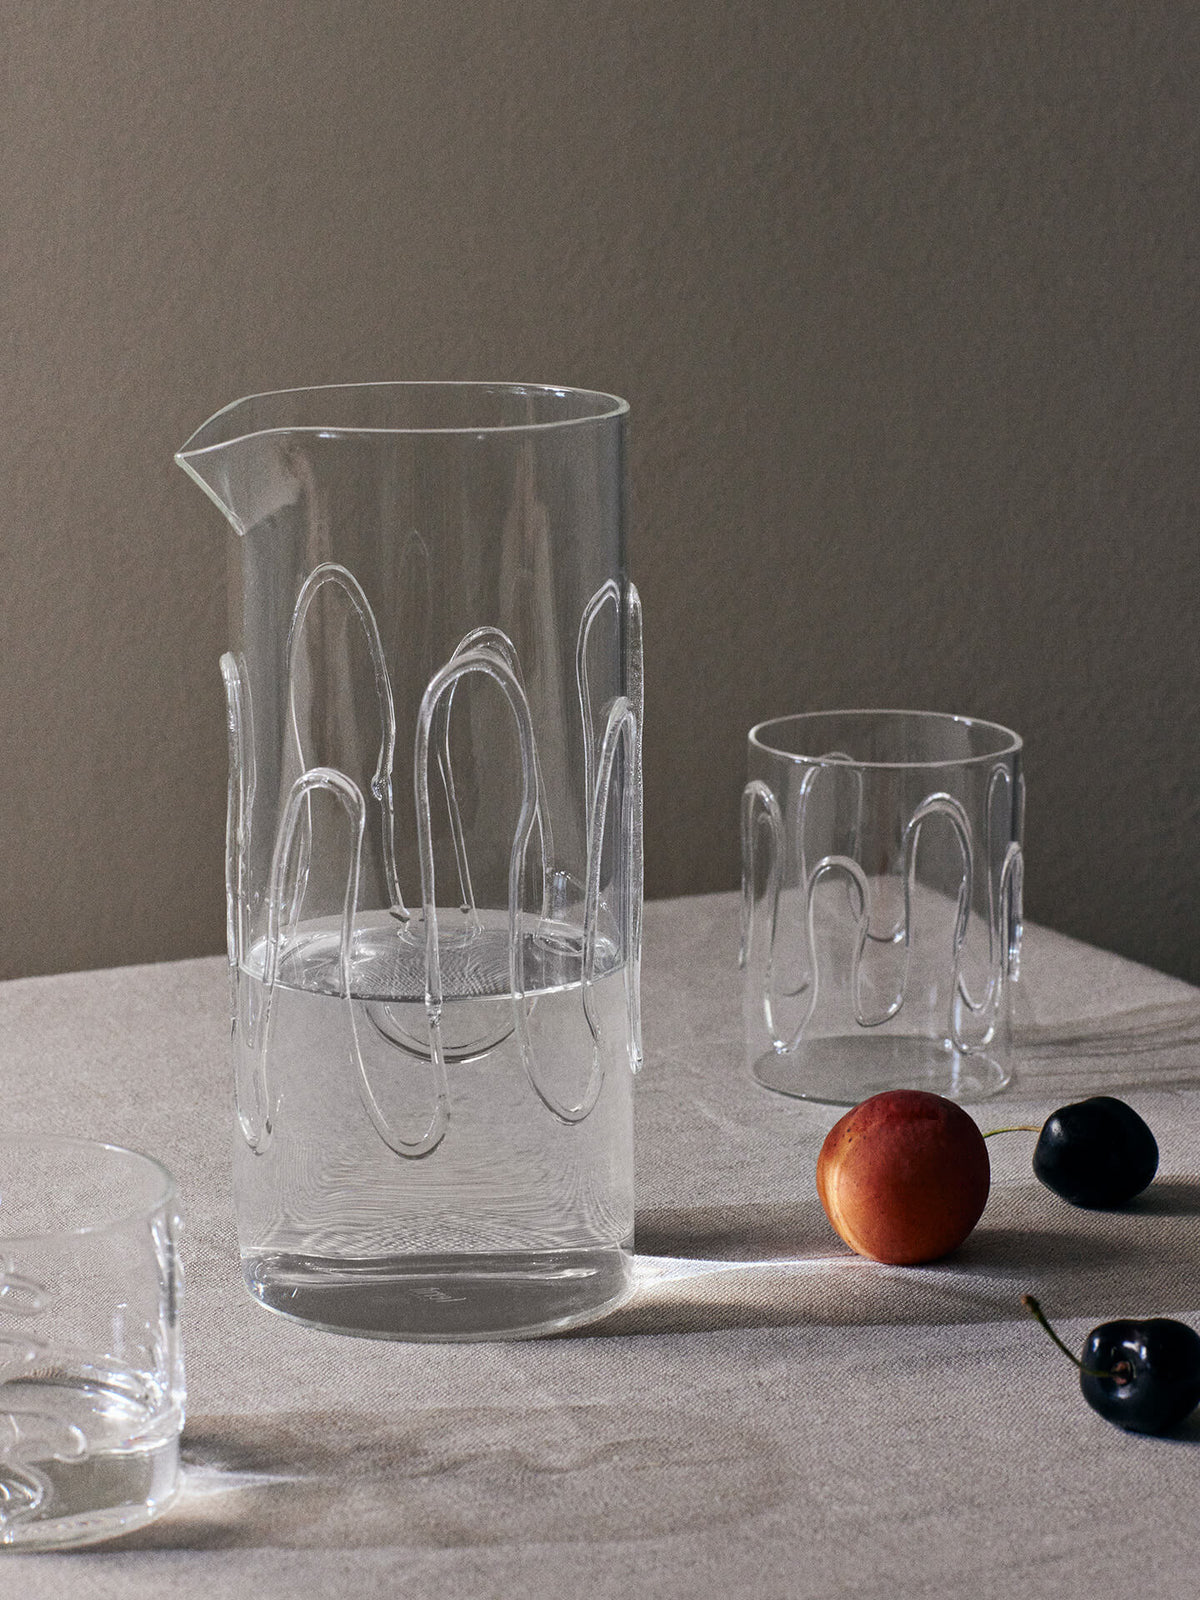 Doodle Carafe by Ferm Living